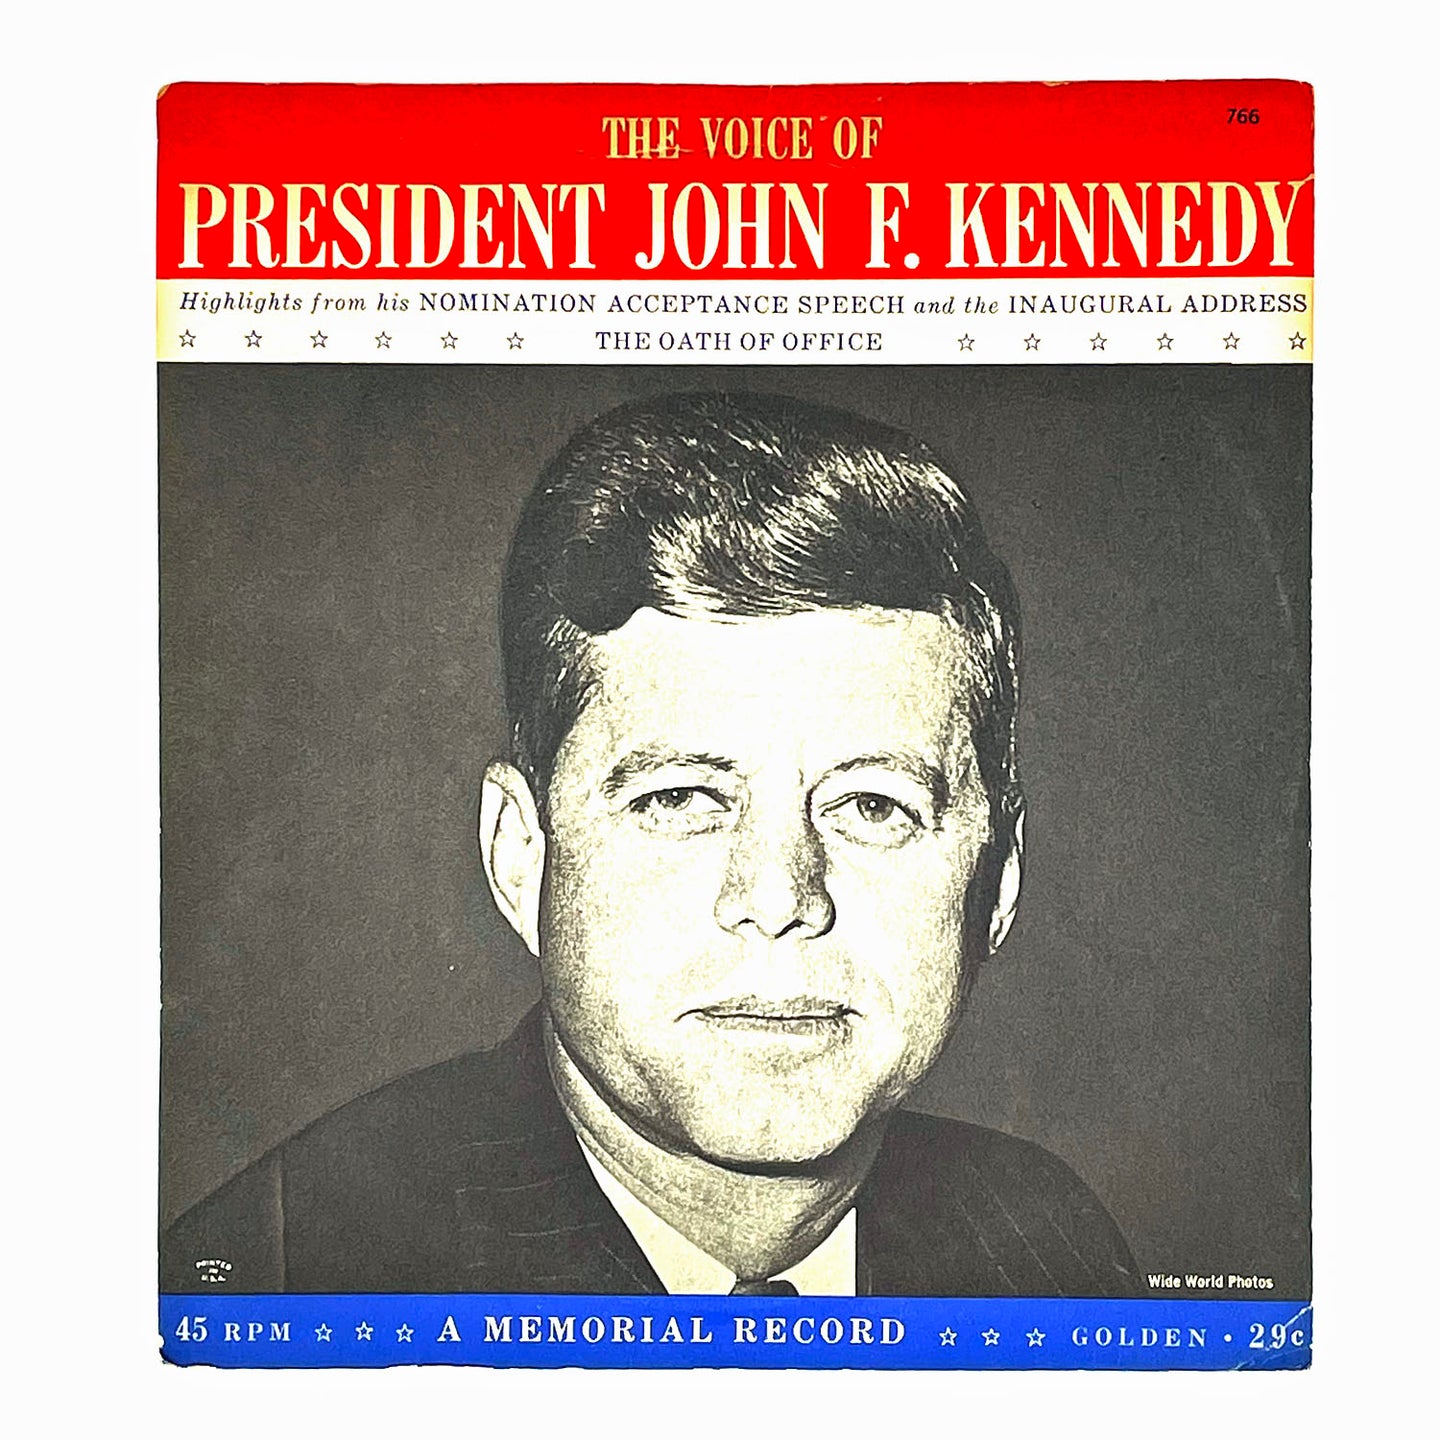 Voice of President John F. Kennedy : A MEMORIAL RECORD